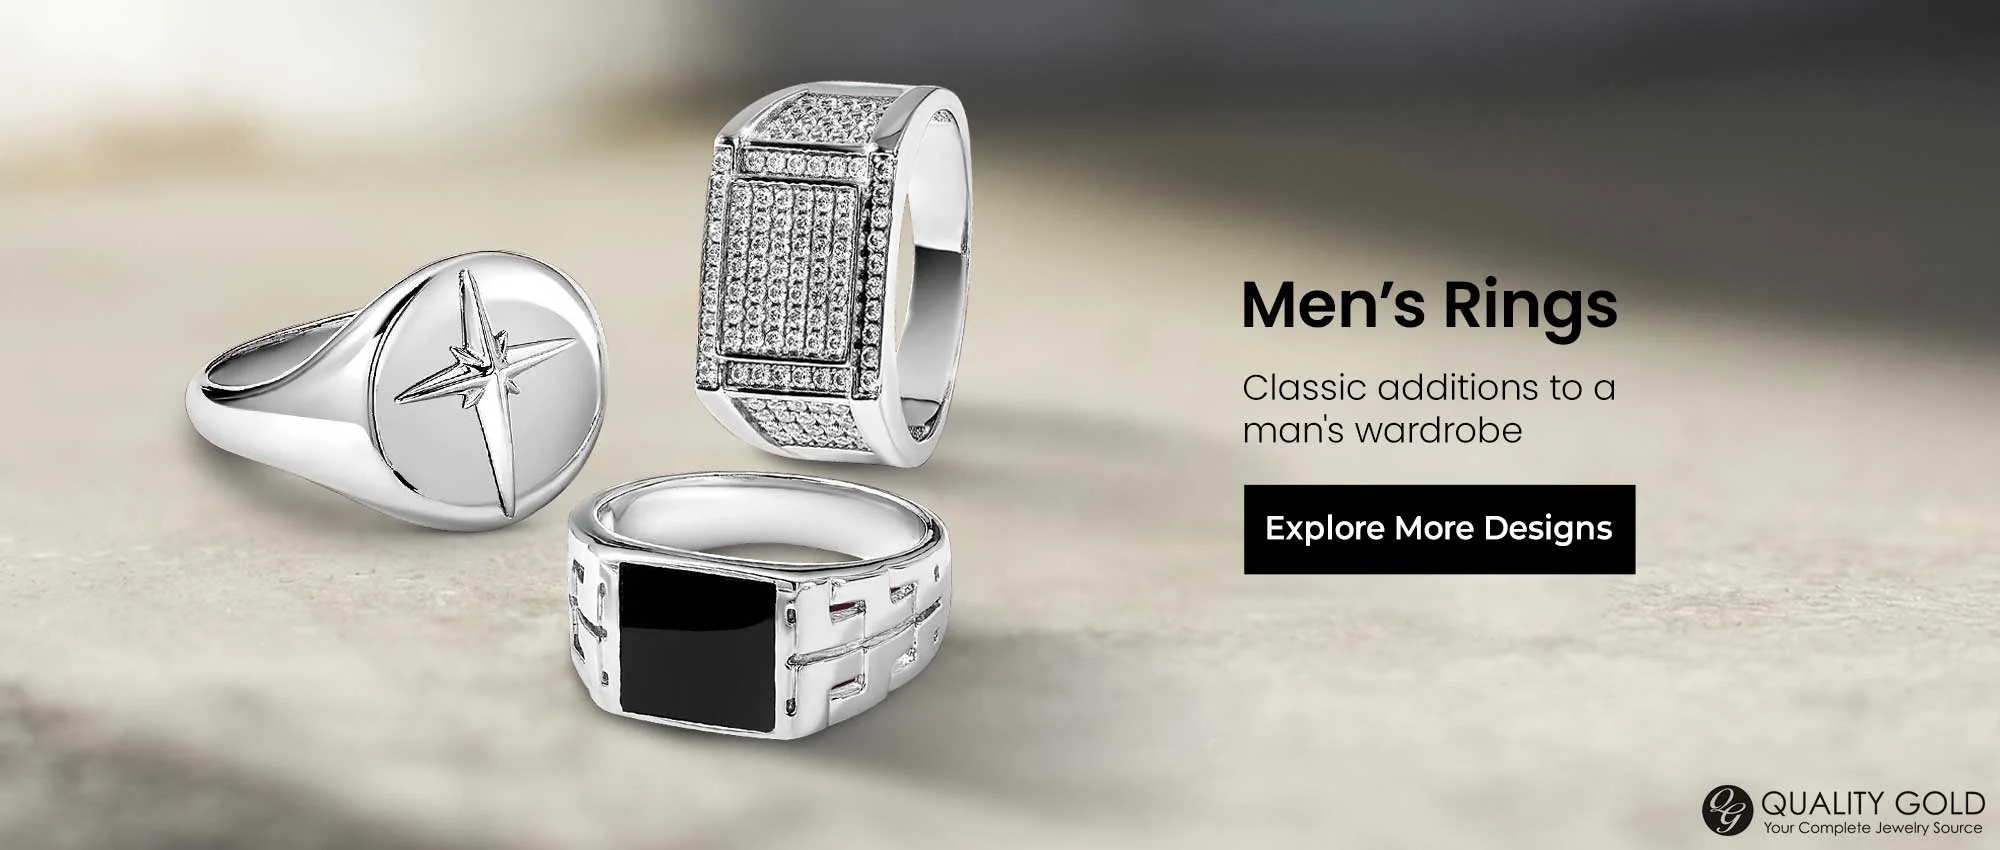 Men^s Ring Collection at Borthwick Jewelry